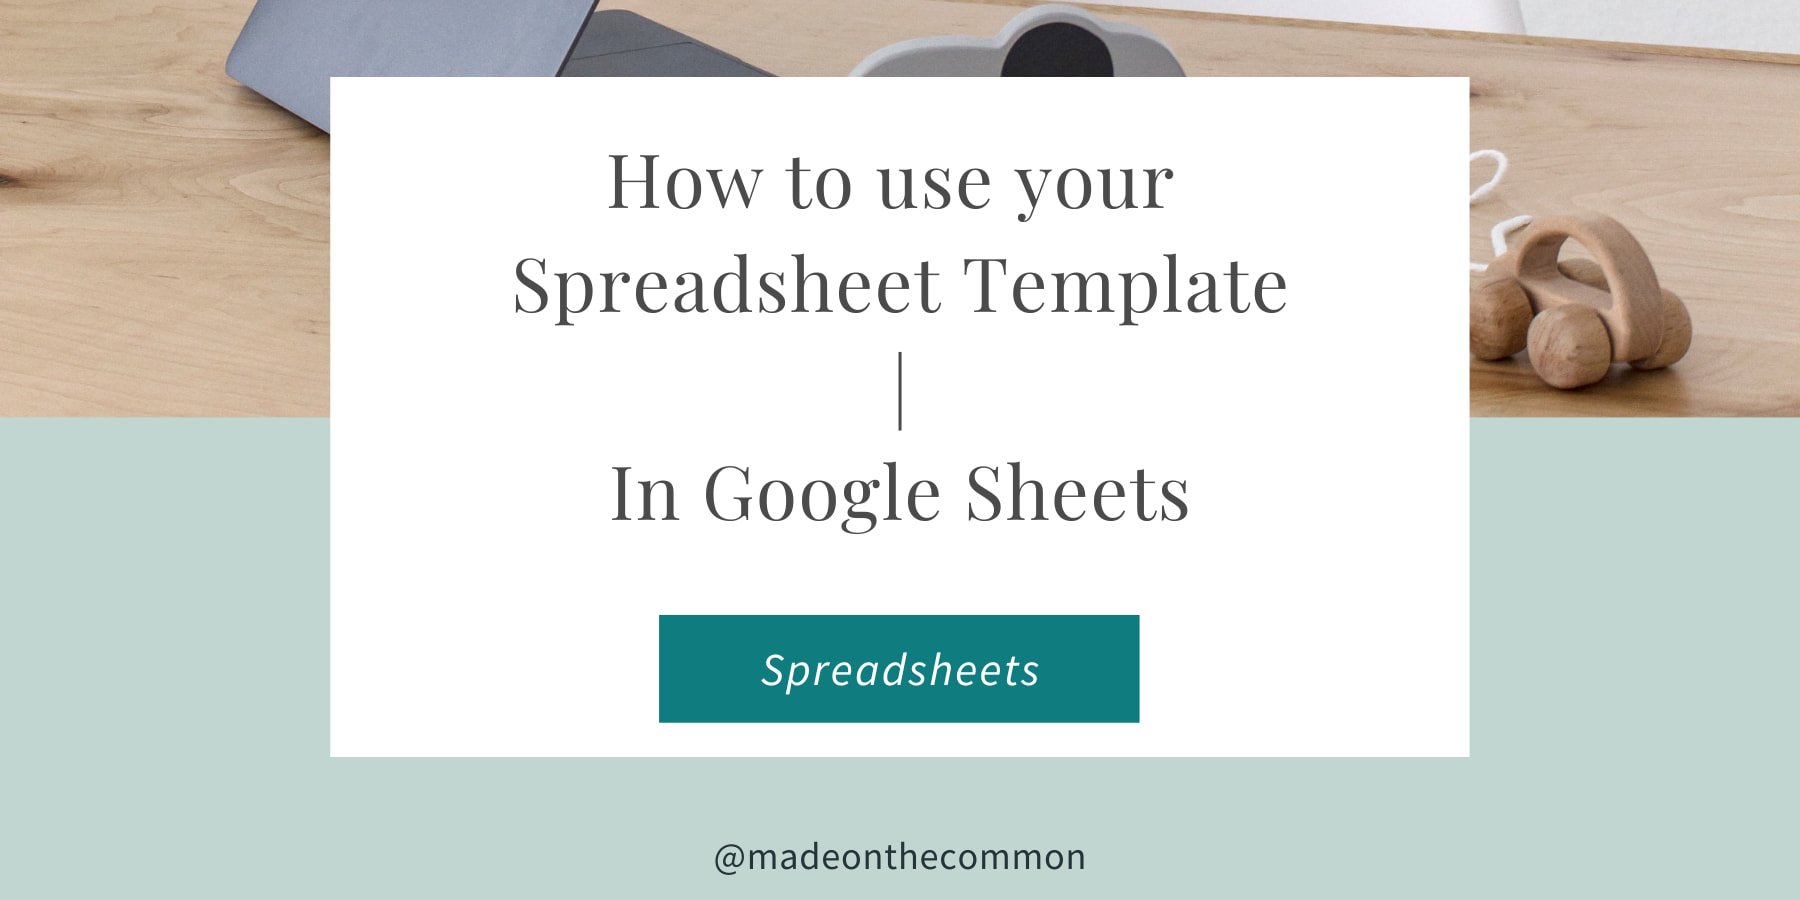 Can you use Excel templates in Google Sheets?